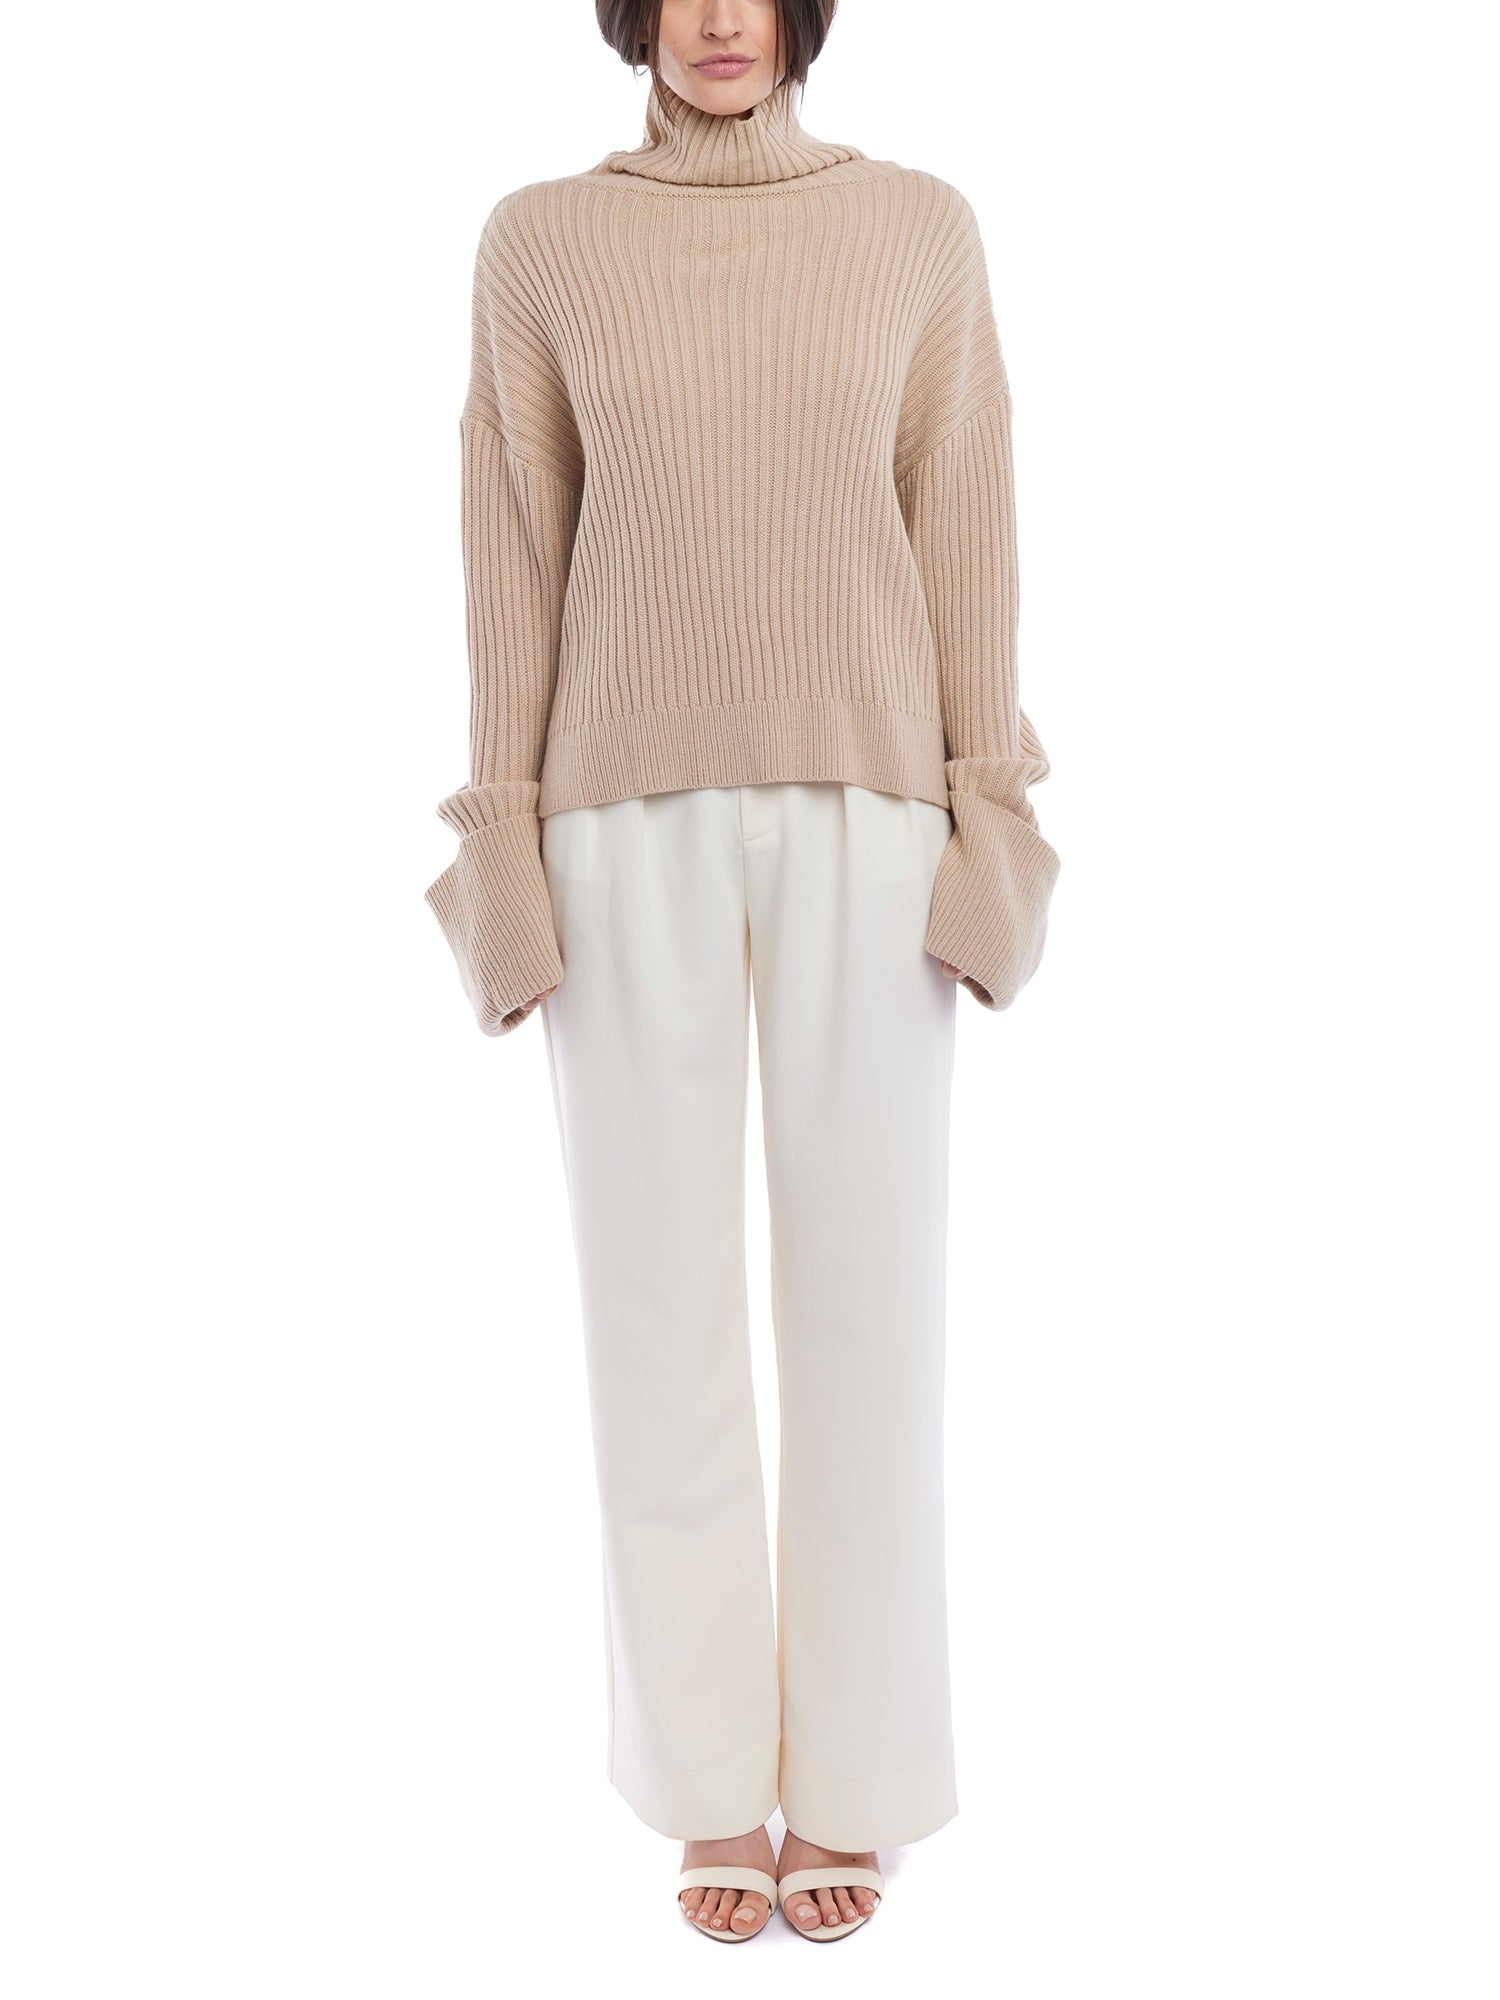 turtleneck sweater with a drop shoulder seam, large rolled cuffs, small side hem slits and a relaxed fit in oatmeal